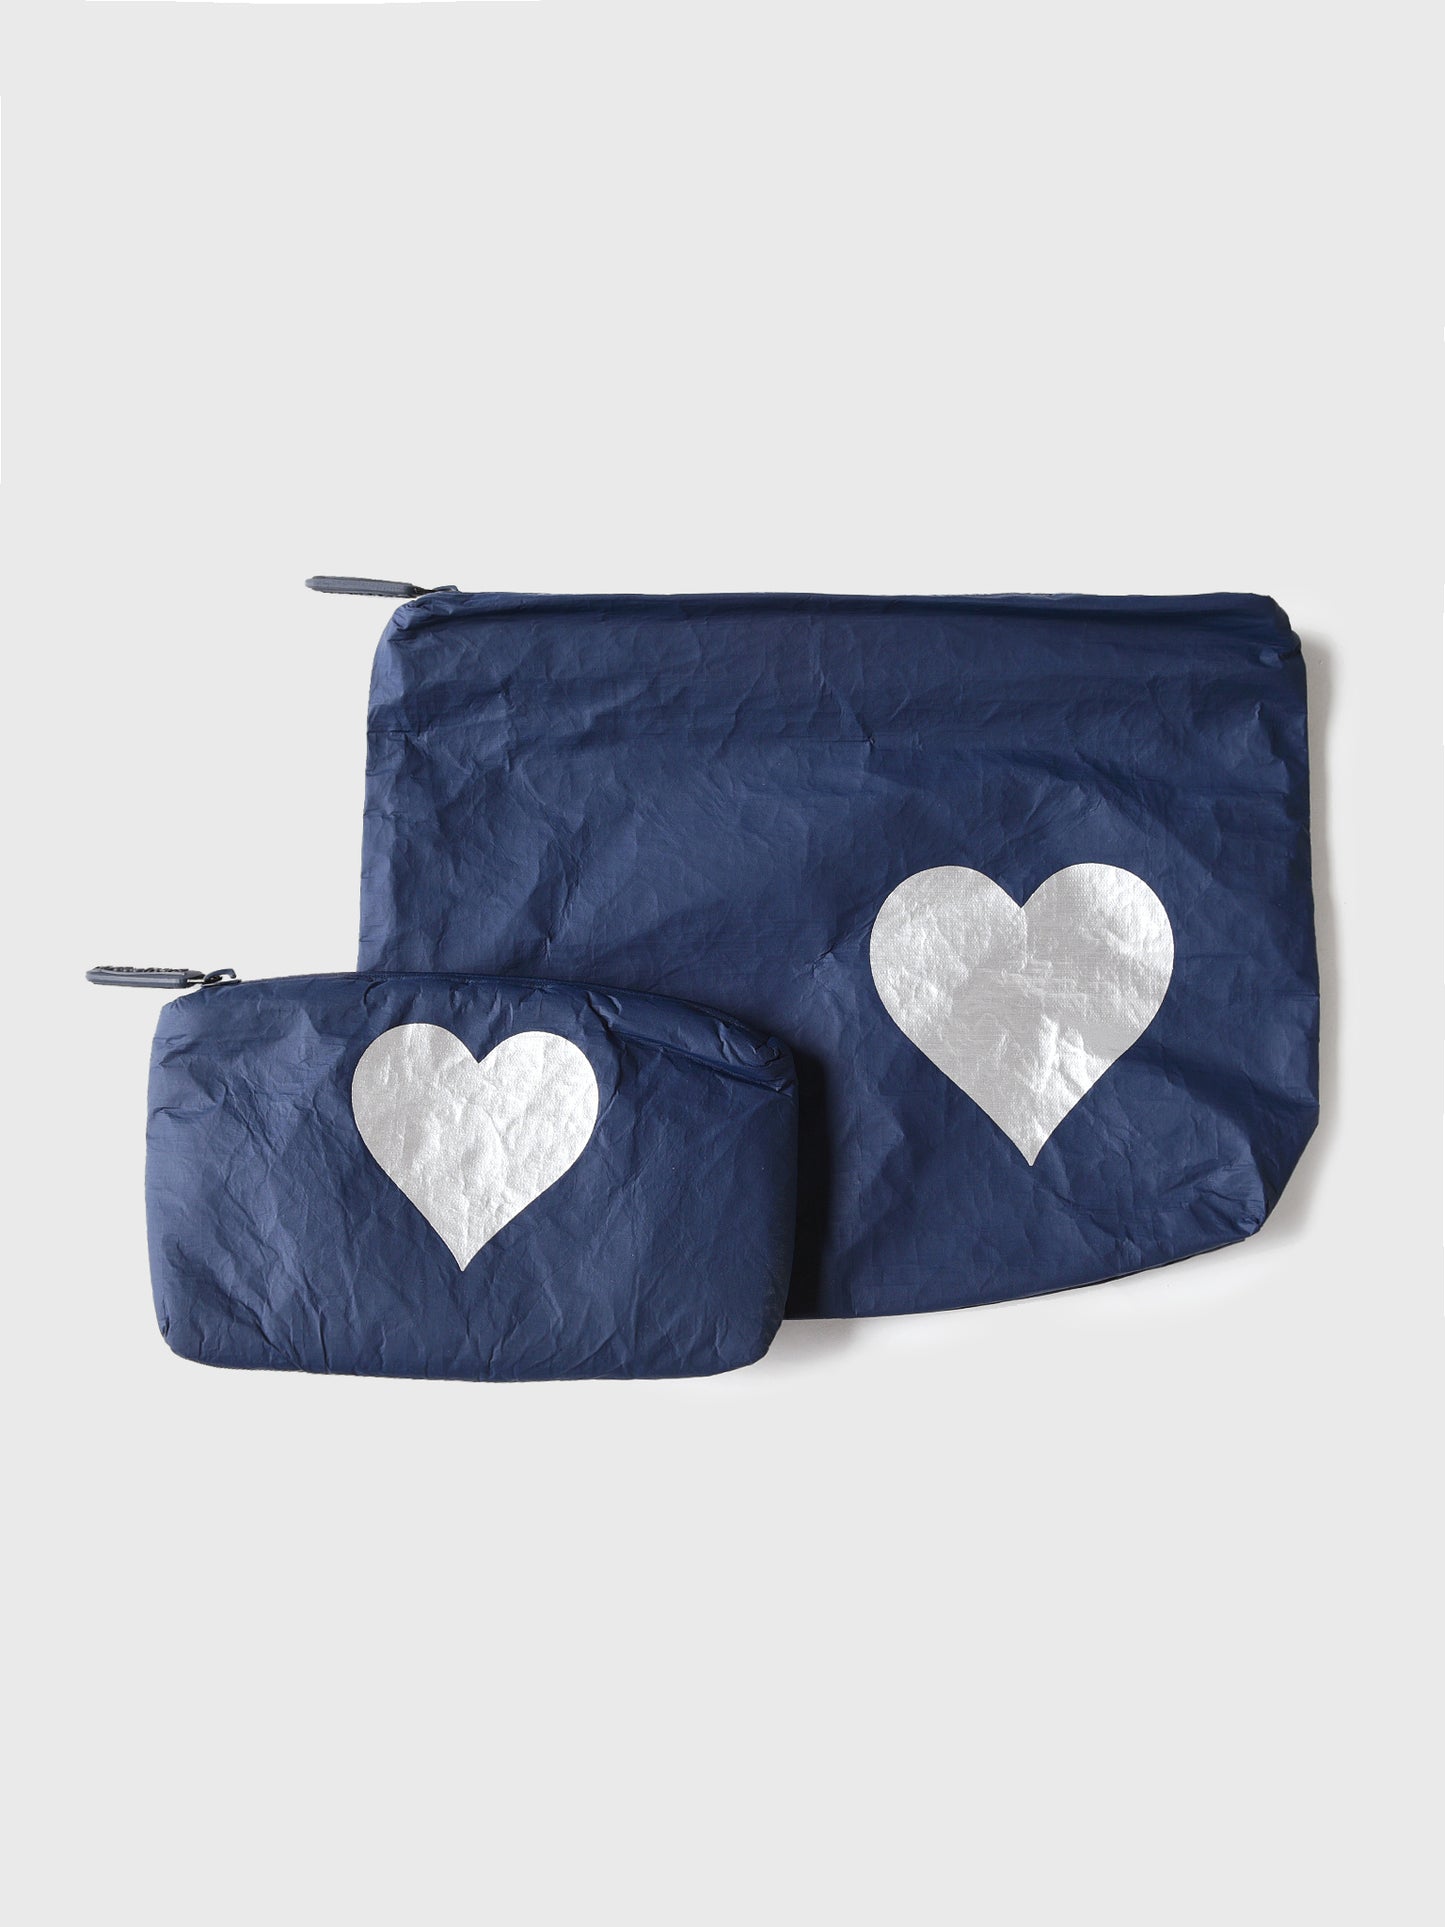 HiLoveTravel Set Of Two Navy With Metallic Silver Heart Packs